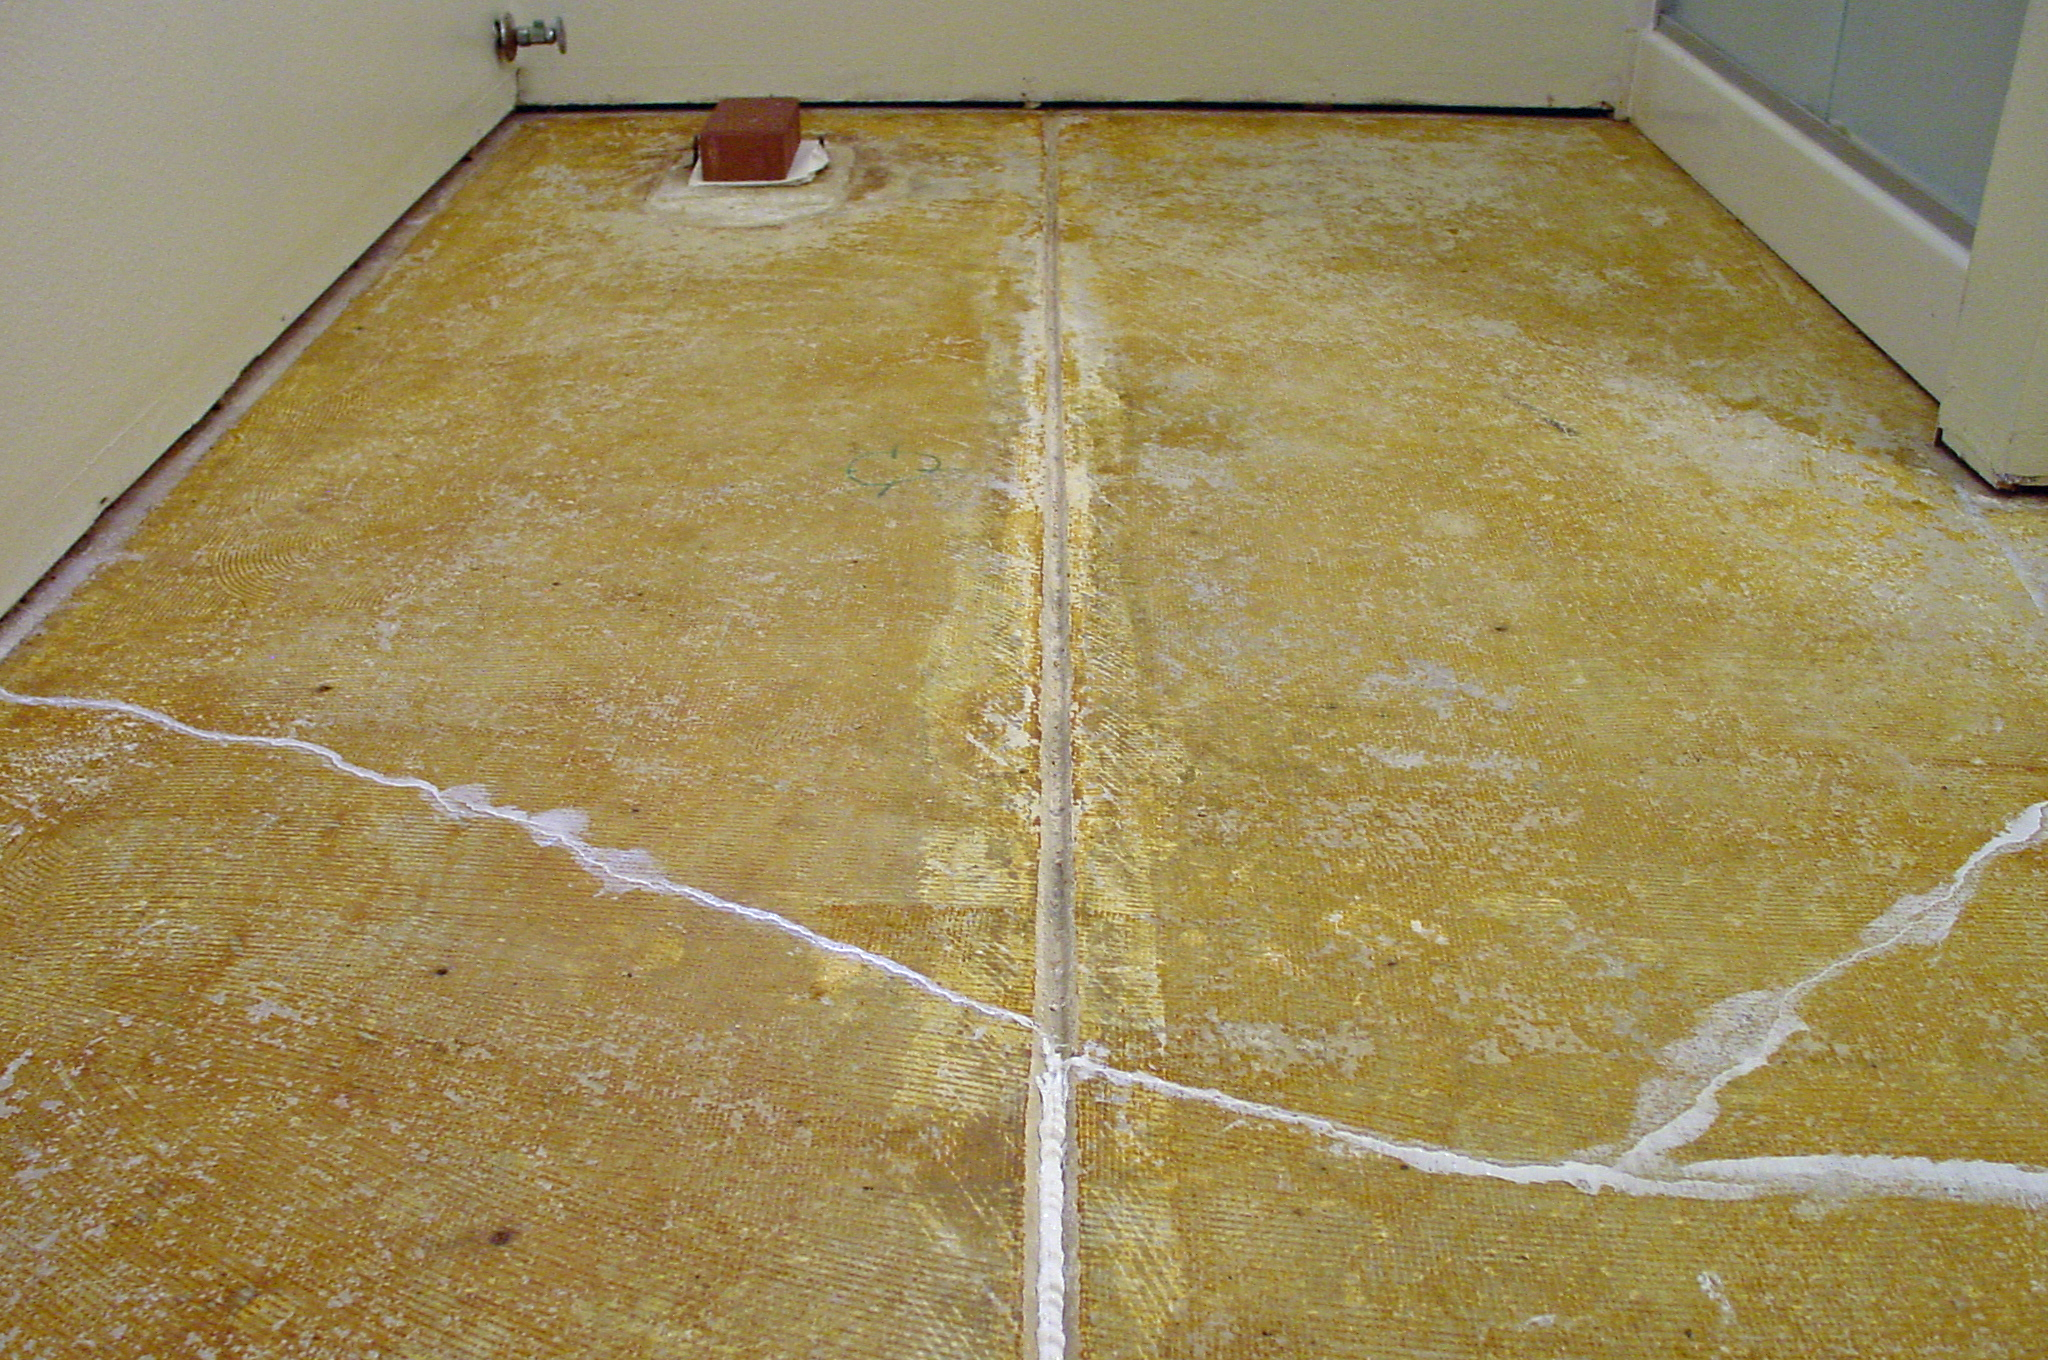 How To Lay A Floating Porcelain Or Ceramic Tile Floor Over A Concrete Slab That Has Cracks Contraction Joints Or Expansion Joints,3 Bedroom Houses For Rent In Omaha Ne